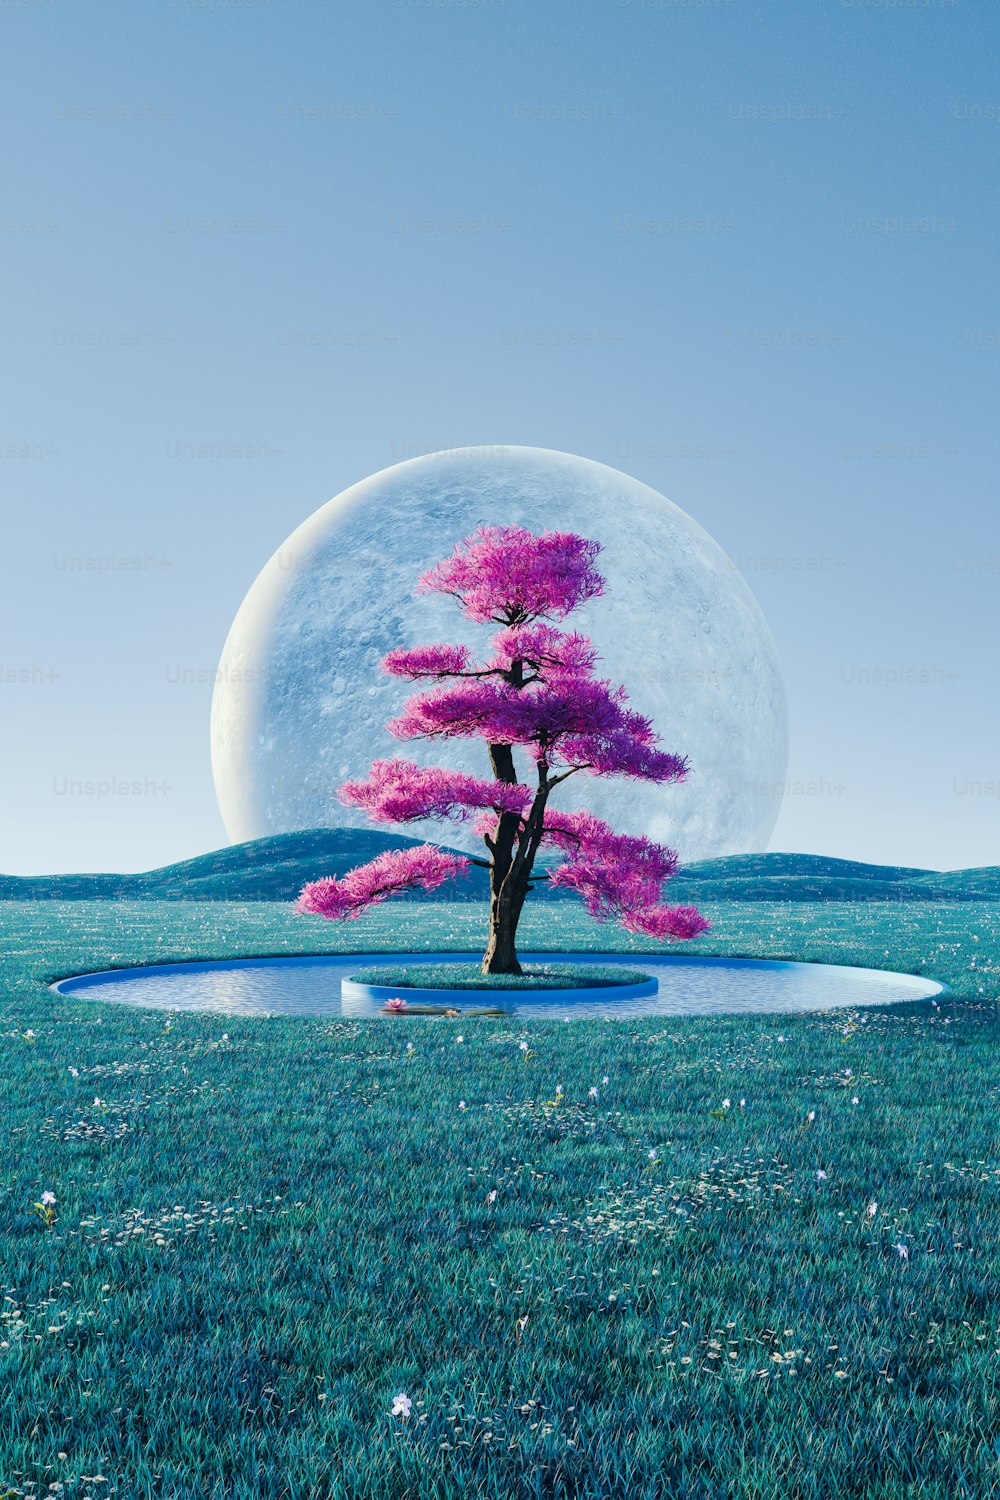 a tree in a field with a full moon in the background